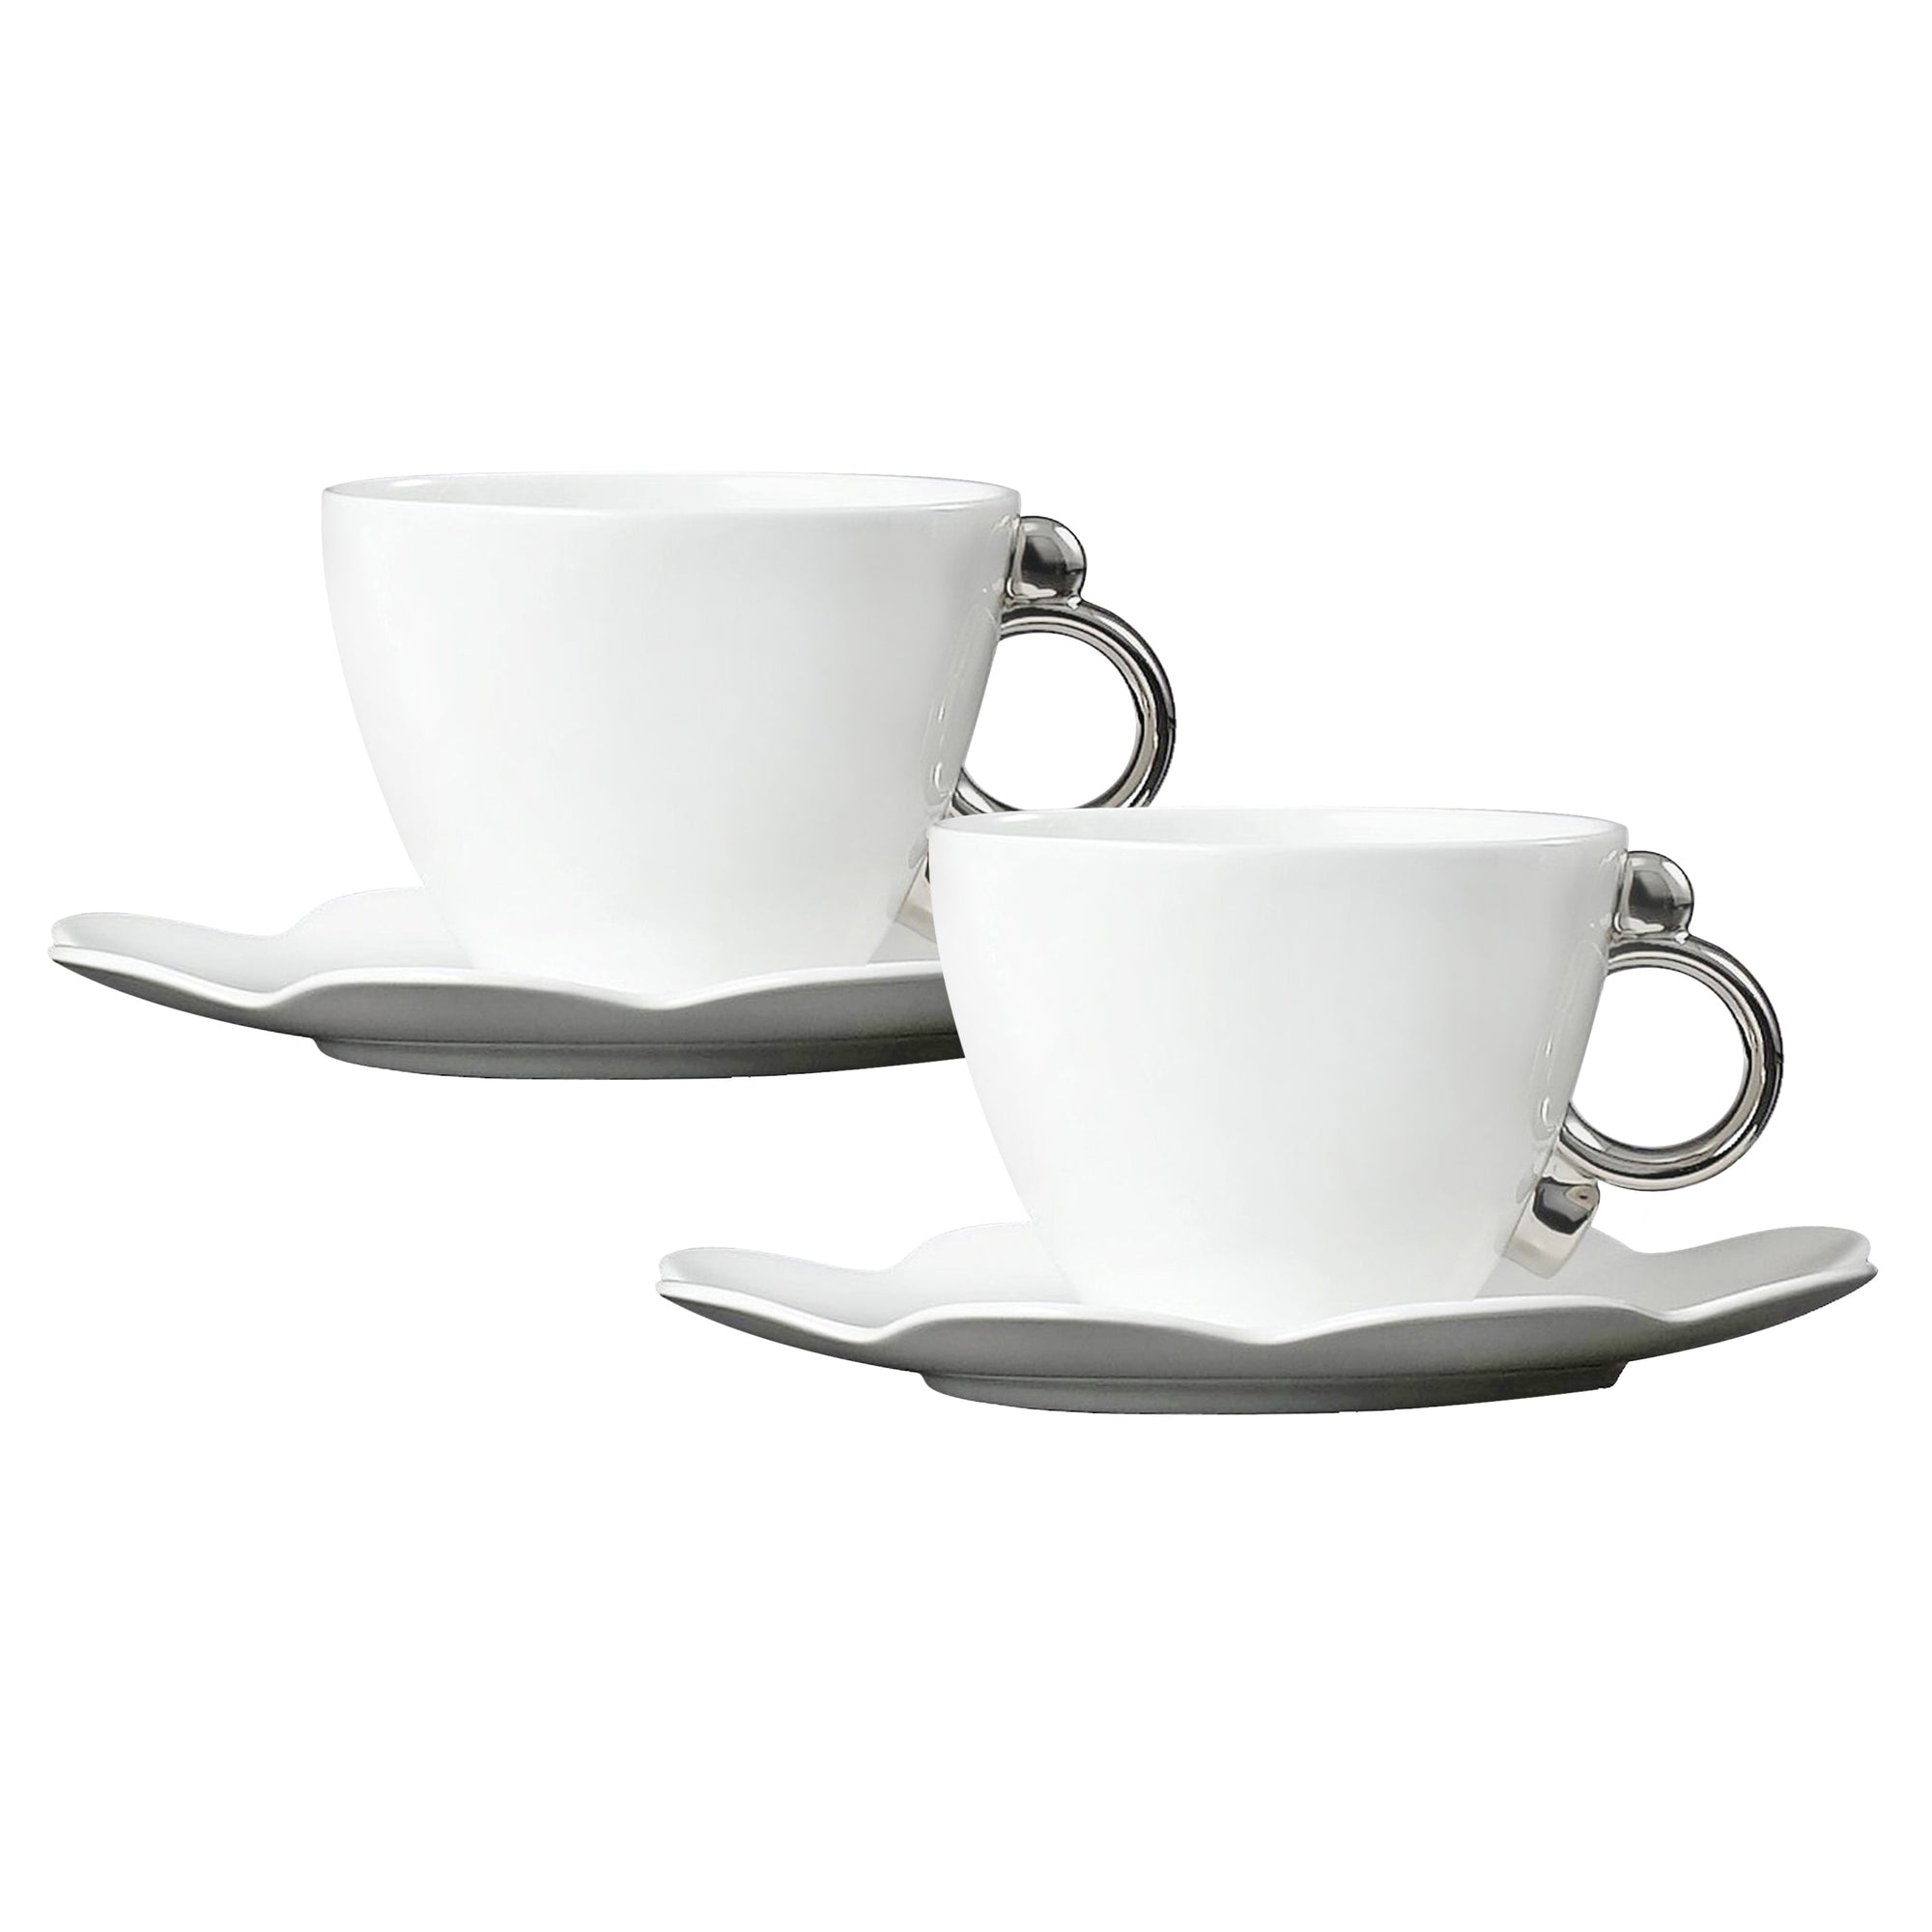 Prouna Cup & Saucer with Silver Rim Set of 2 White Background Photo